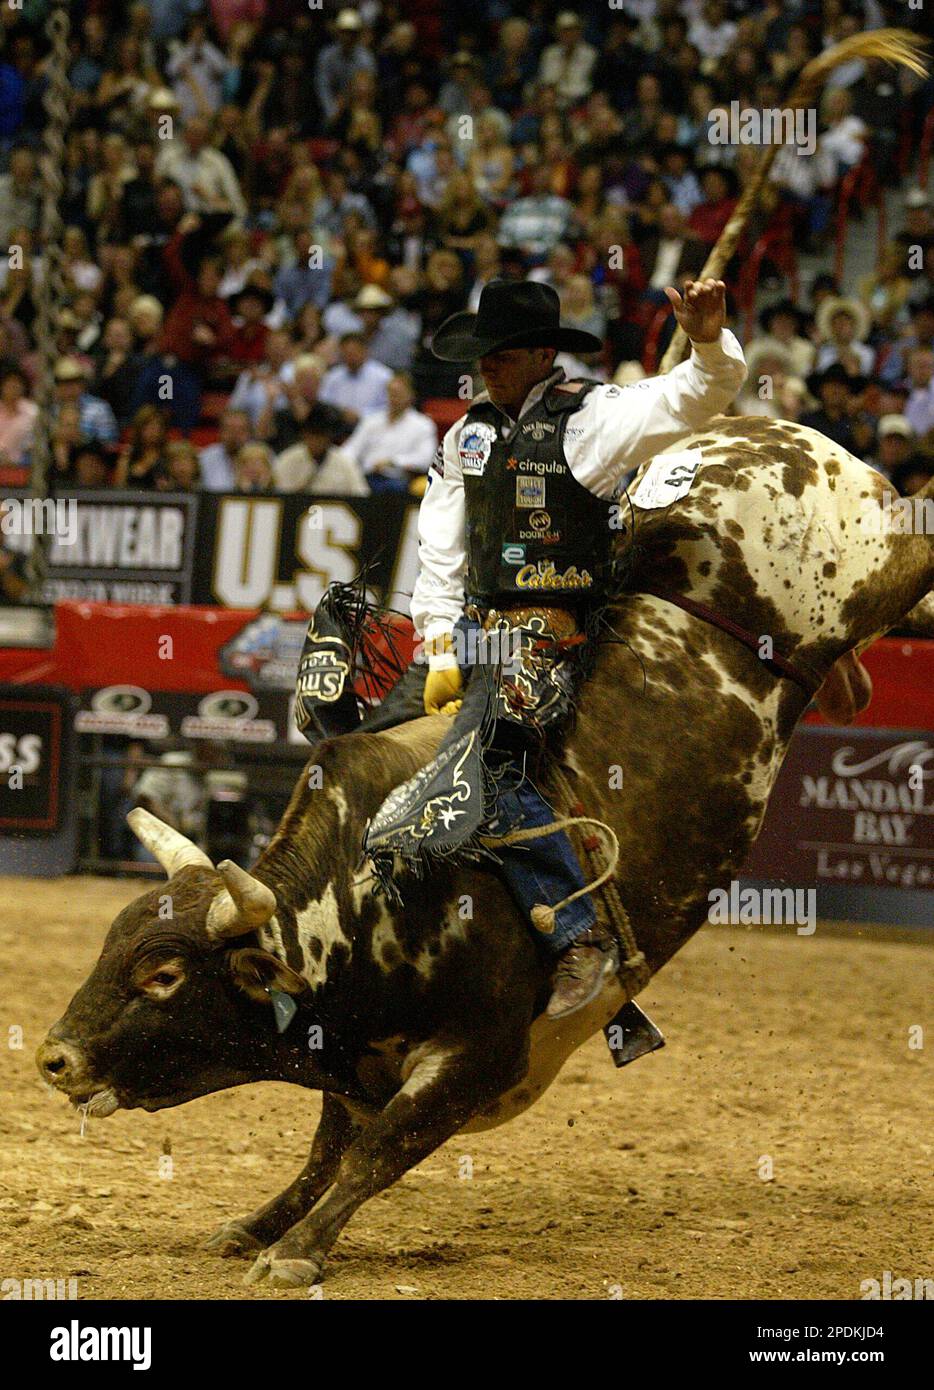 Justin McBride, of Elk City, Okla., hangs on a bull as he competes during the sixth round of Professional Bull Riders World Finals in Las Vegas on Saturday, Nov. 5, 2005. McBride, who scored 87.25 Saturday, is leading the competition in overall points. (AP Photo/Jae C. Hong) Banque D'Images